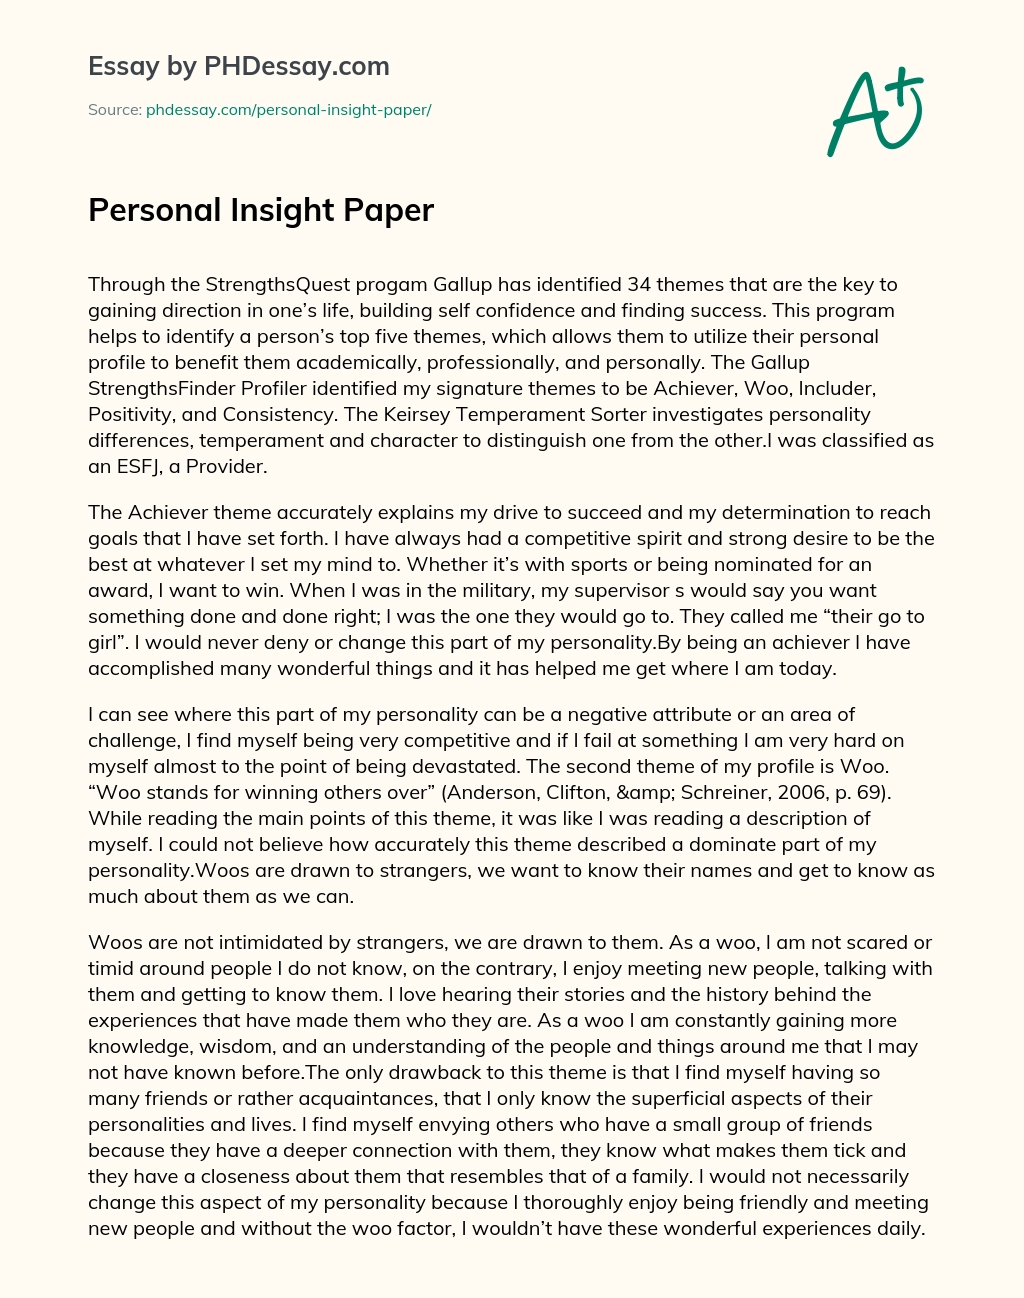 Personal Insight Paper